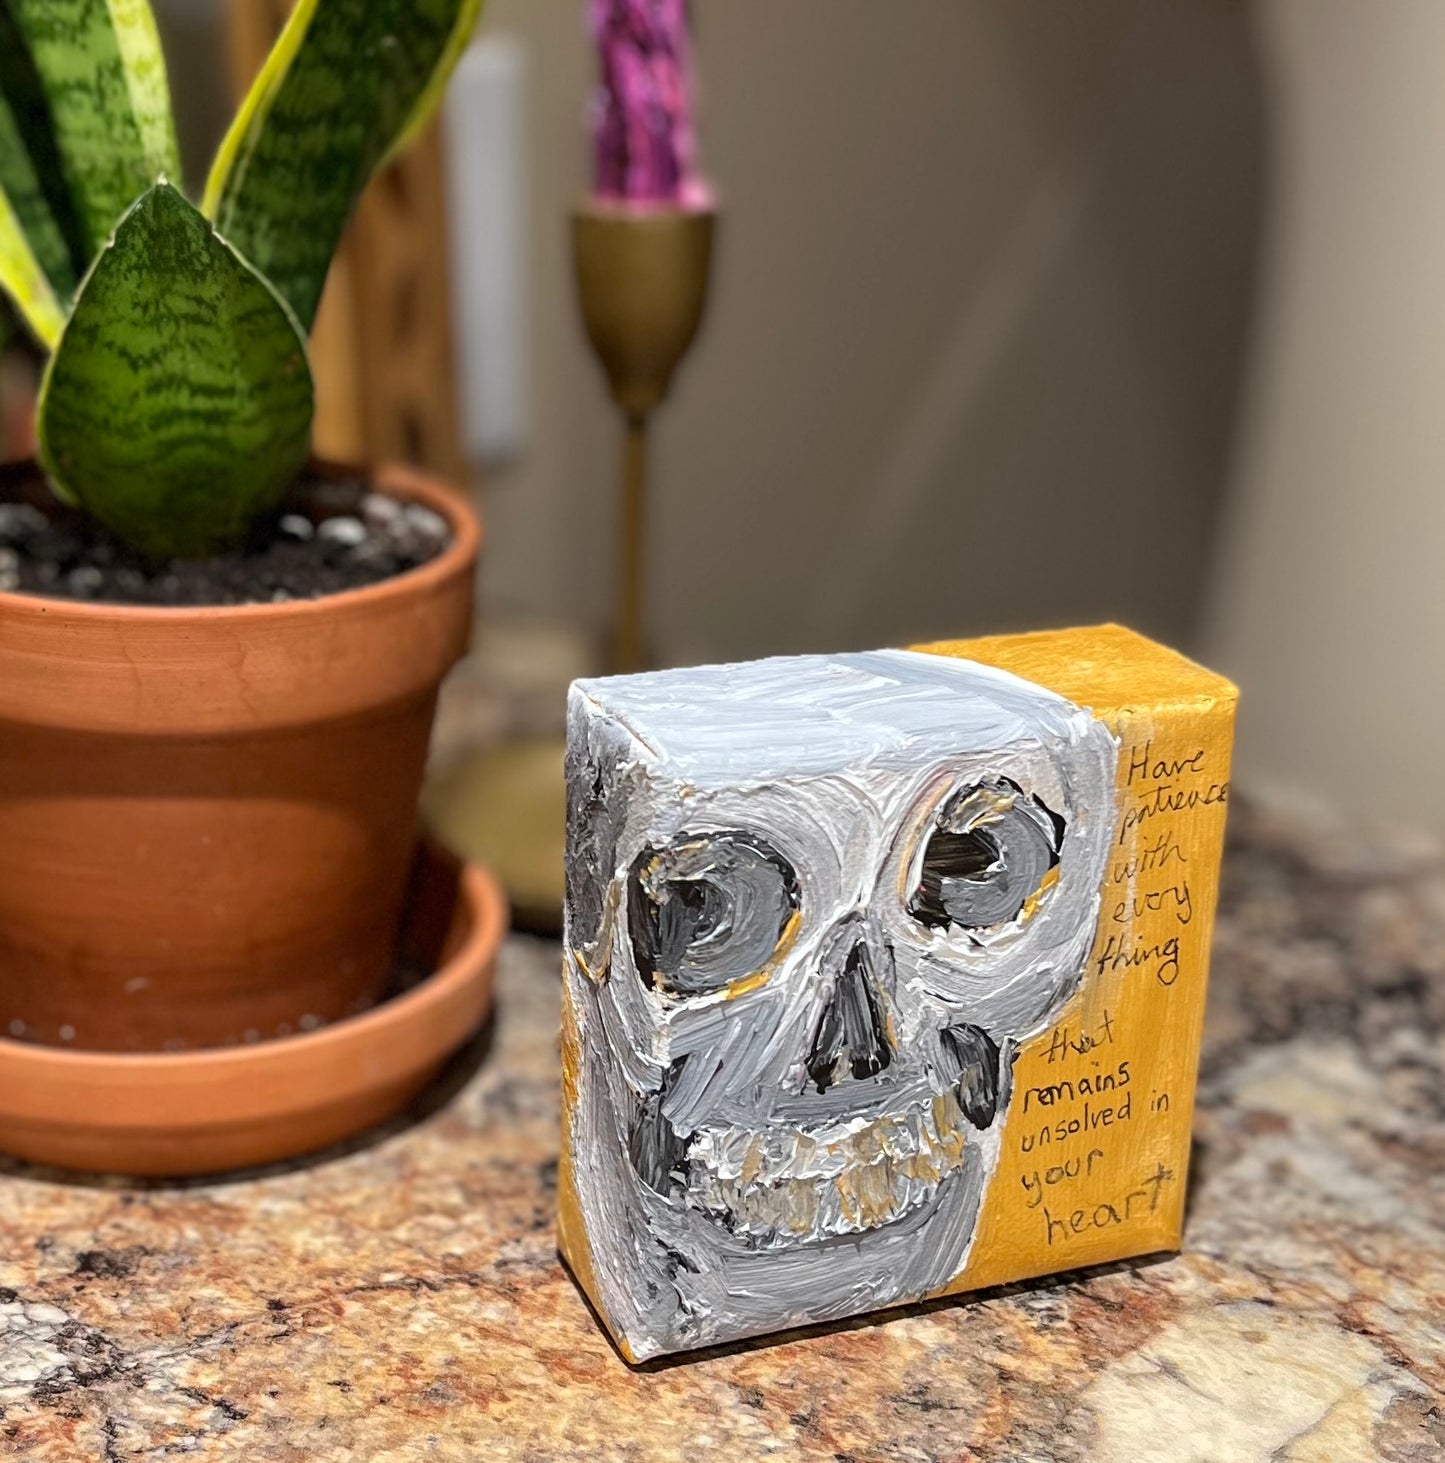 Have Patience - Skull Mini Painting